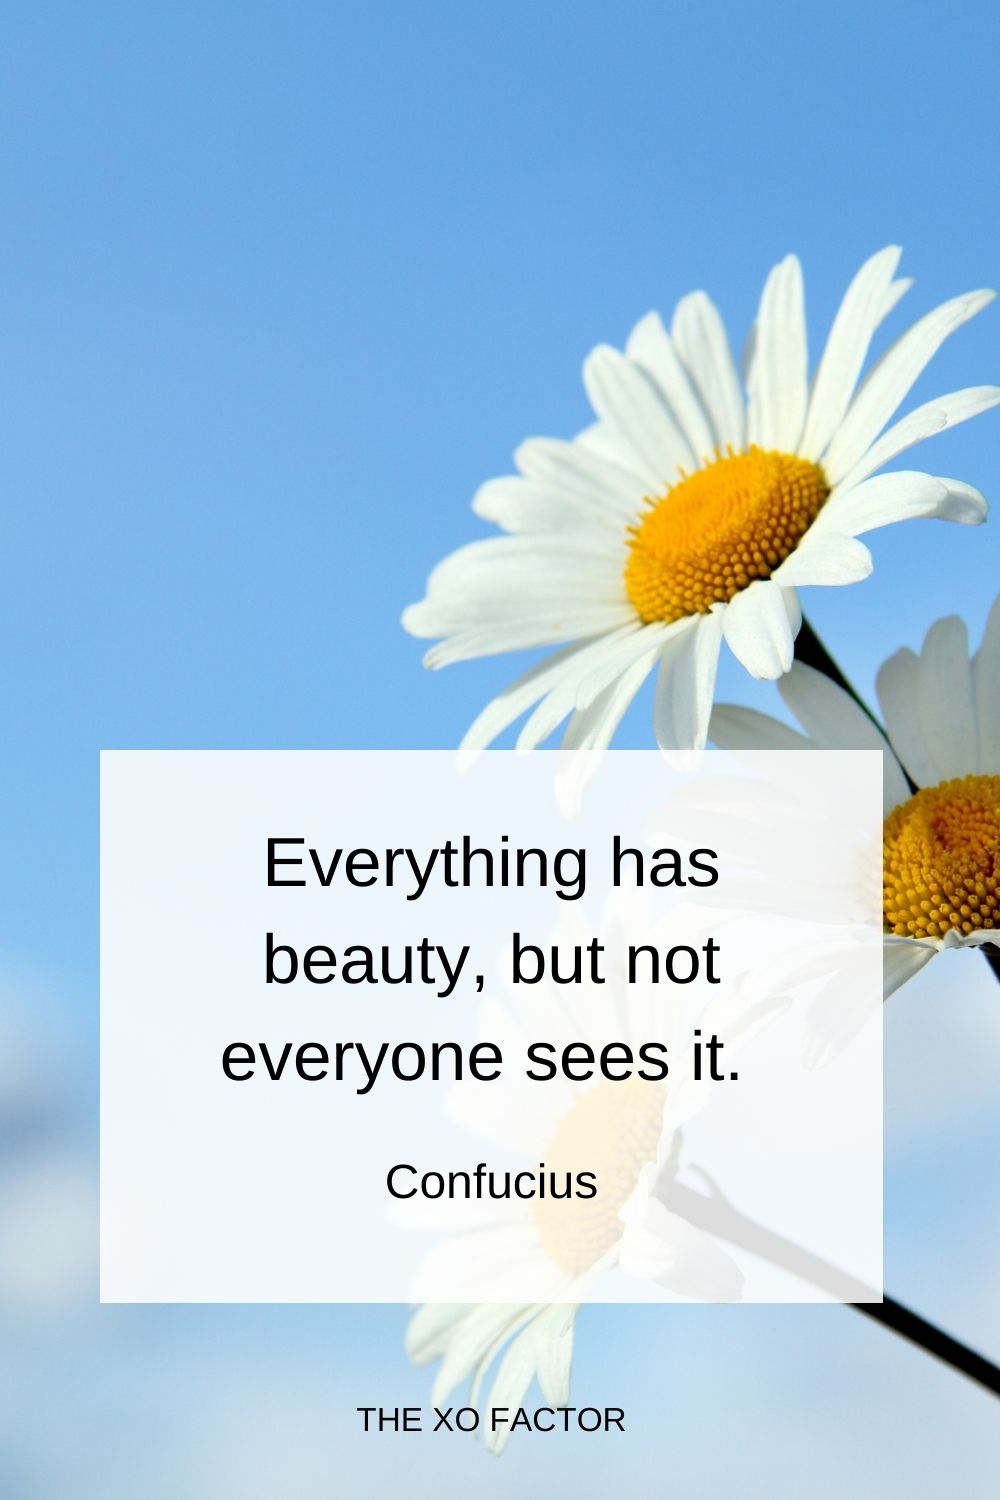 Everything has beauty, but not everyone sees it. Confucius